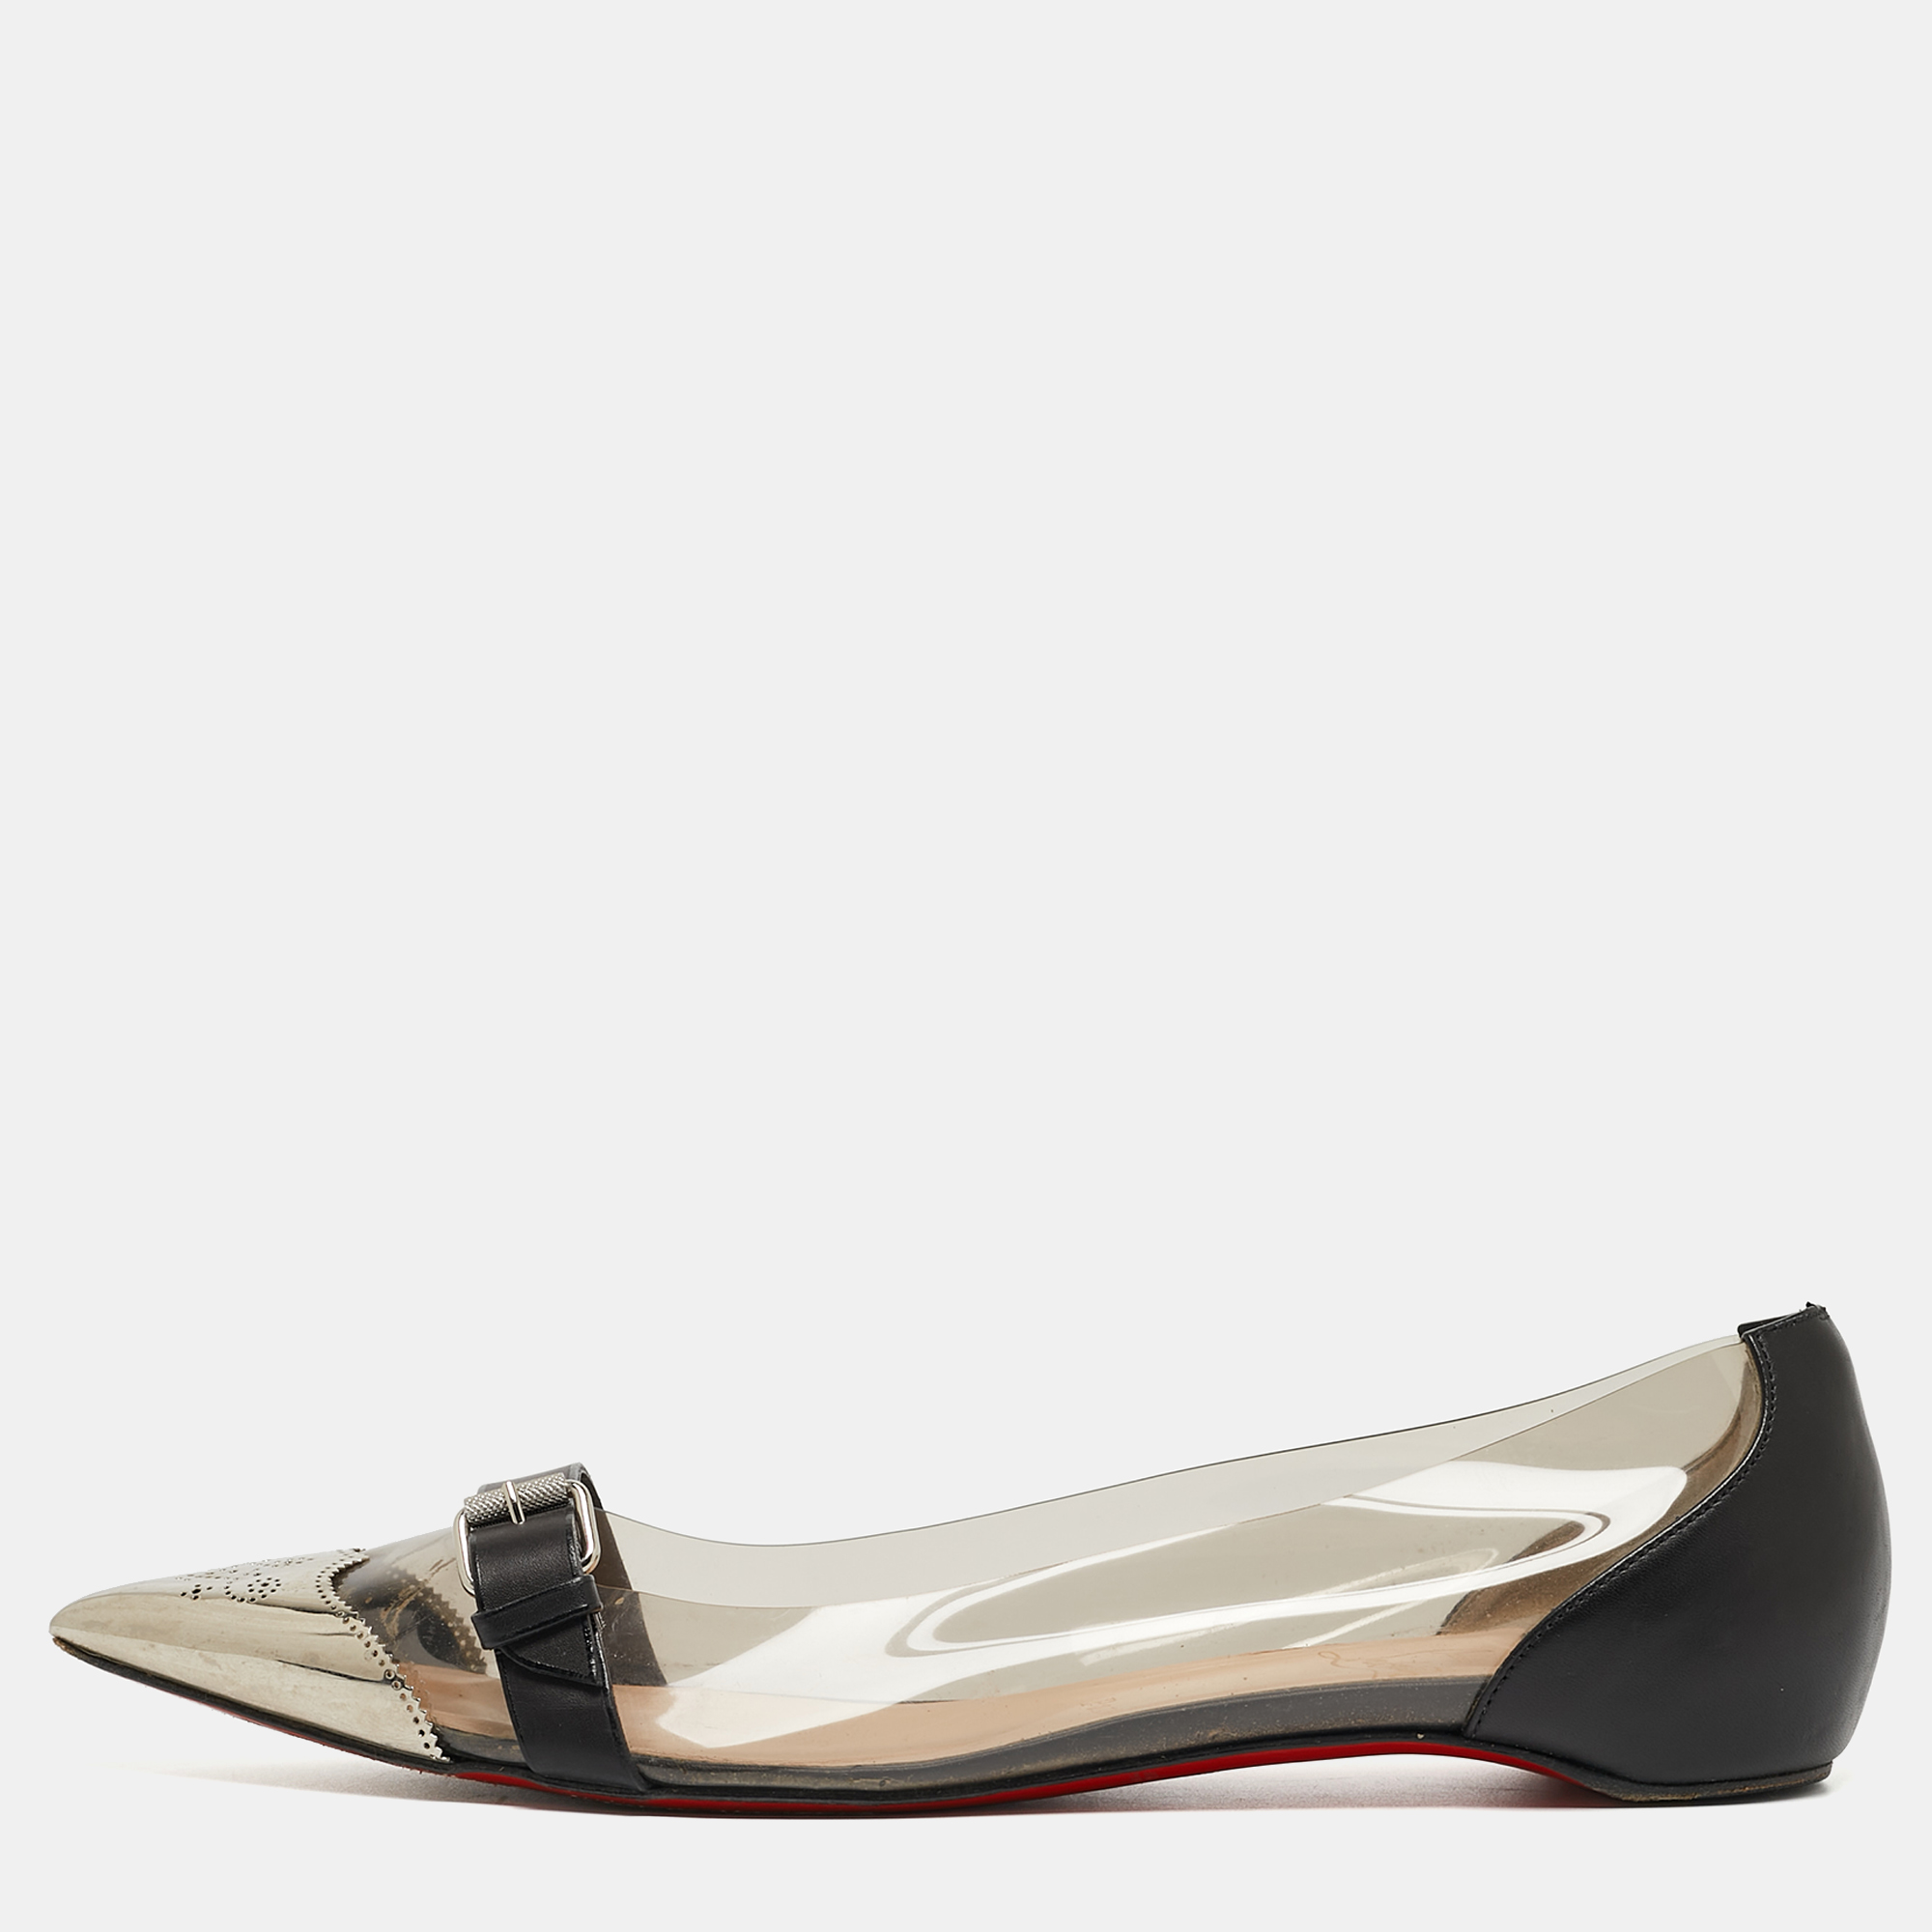 Christian louboutin black/silver leather and pvc buckle ballet flats size 40